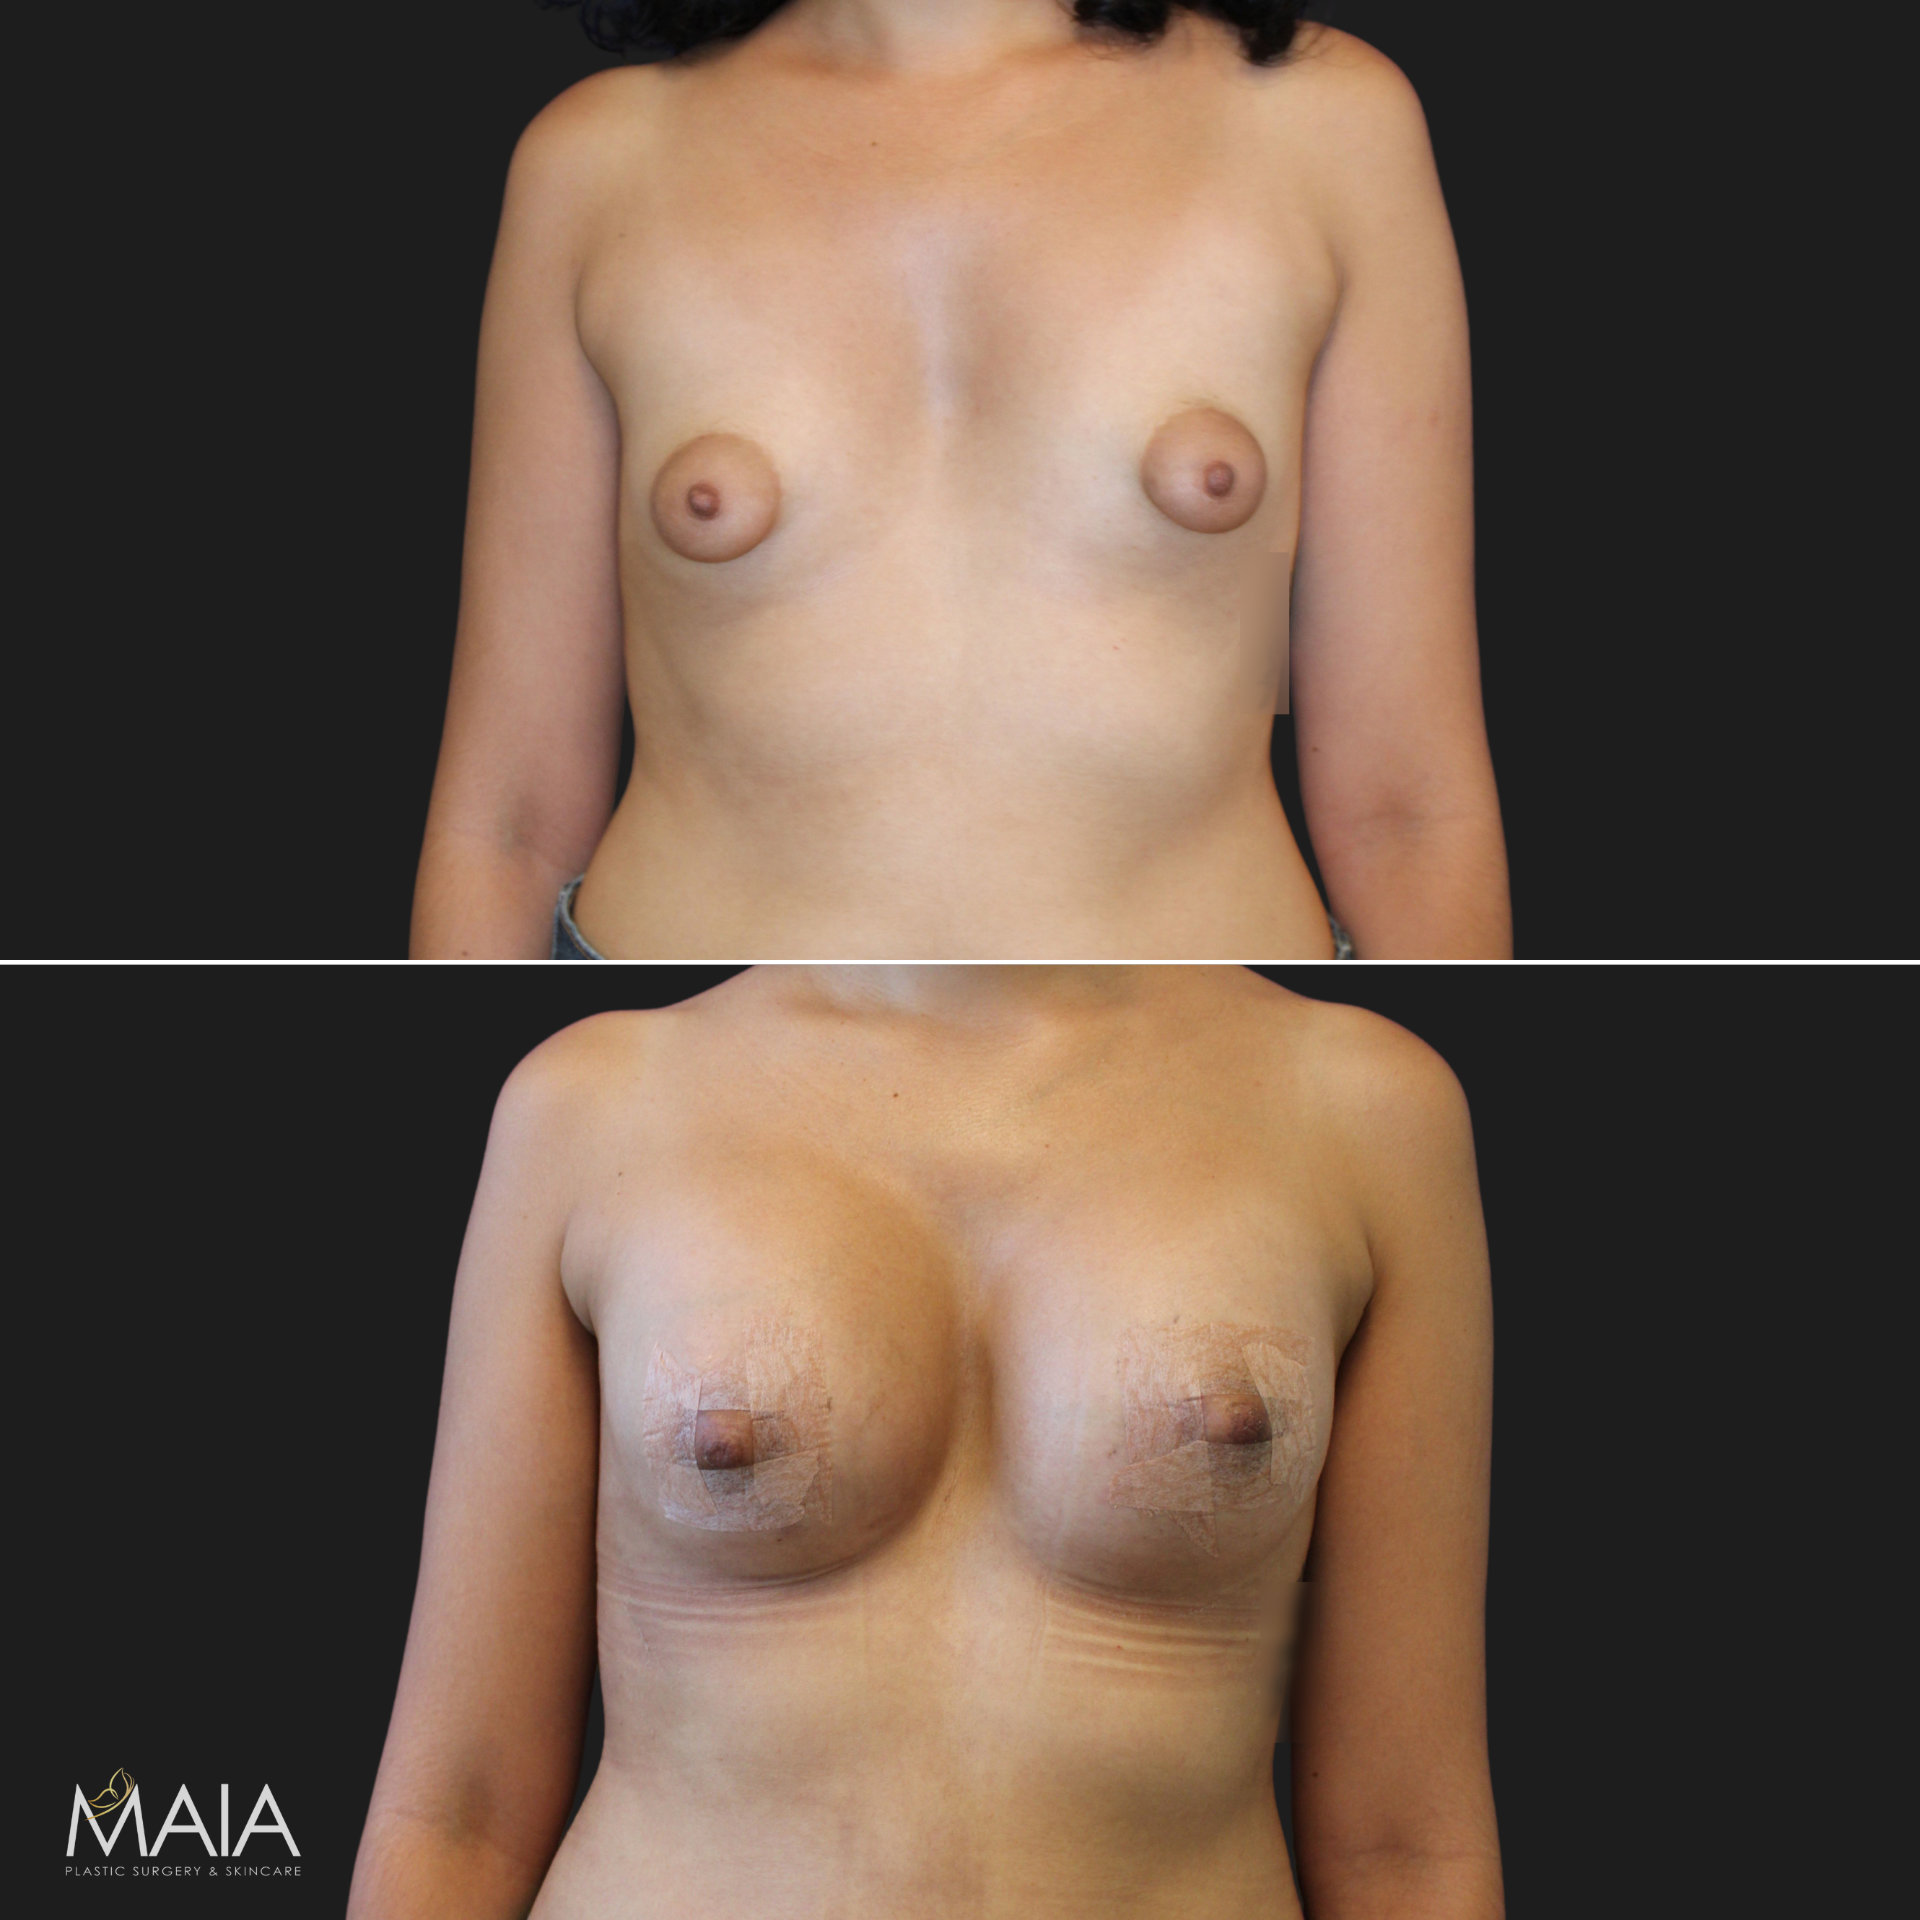 27 year-old with tuberous breasts before and 3 weeks after breast lift, breast augmentation with silicone implants (210 CC, Moderate Profile), and fat grafting to the breasts